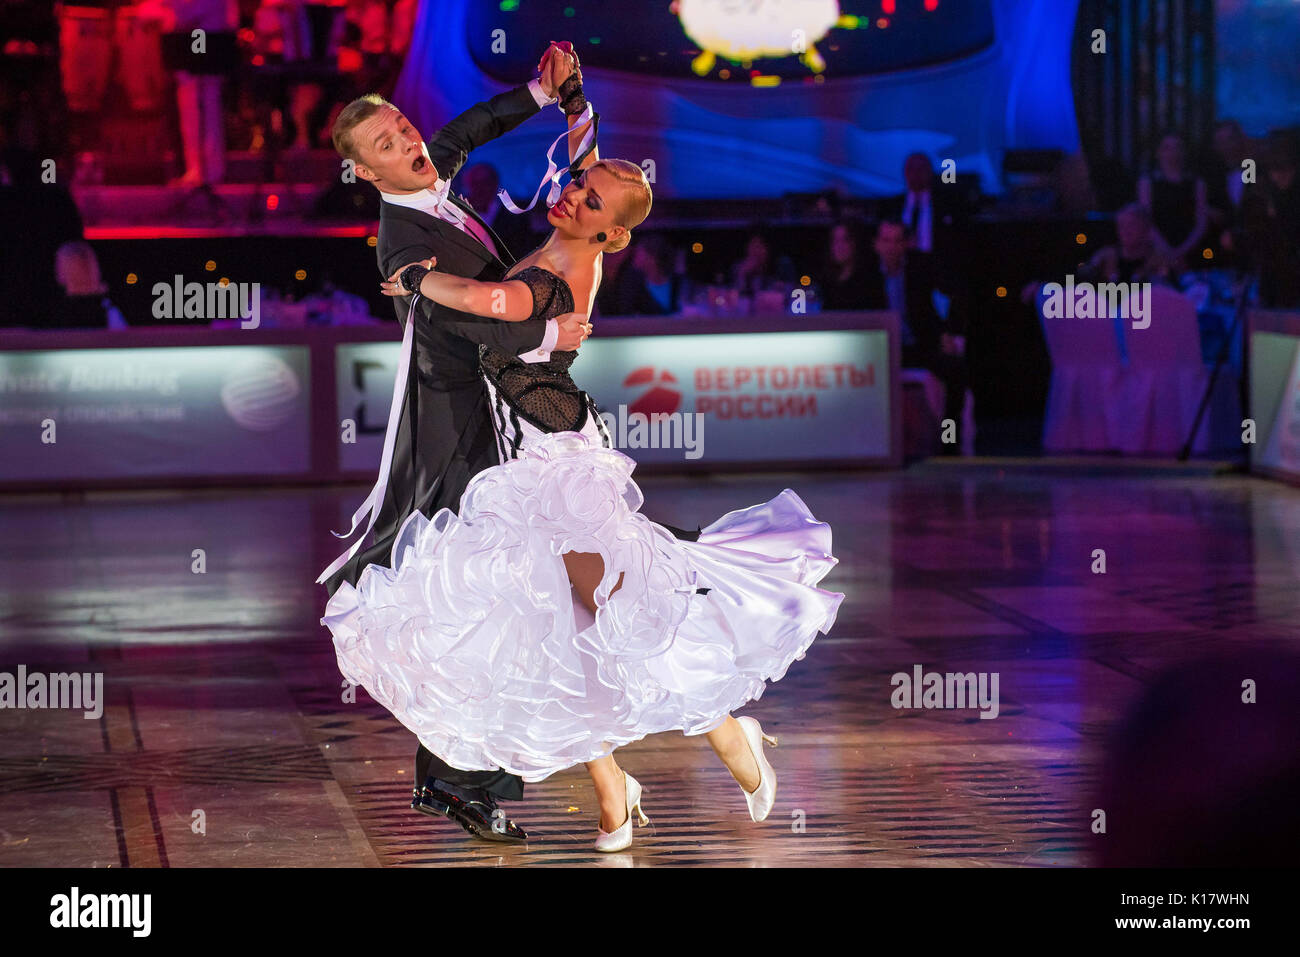 Moscow, Russia - Apr 26, 2015: Unidentified couple performs at the ballroom dance event at the 2015 Open European Professional Latin-American Champion Stock Photo